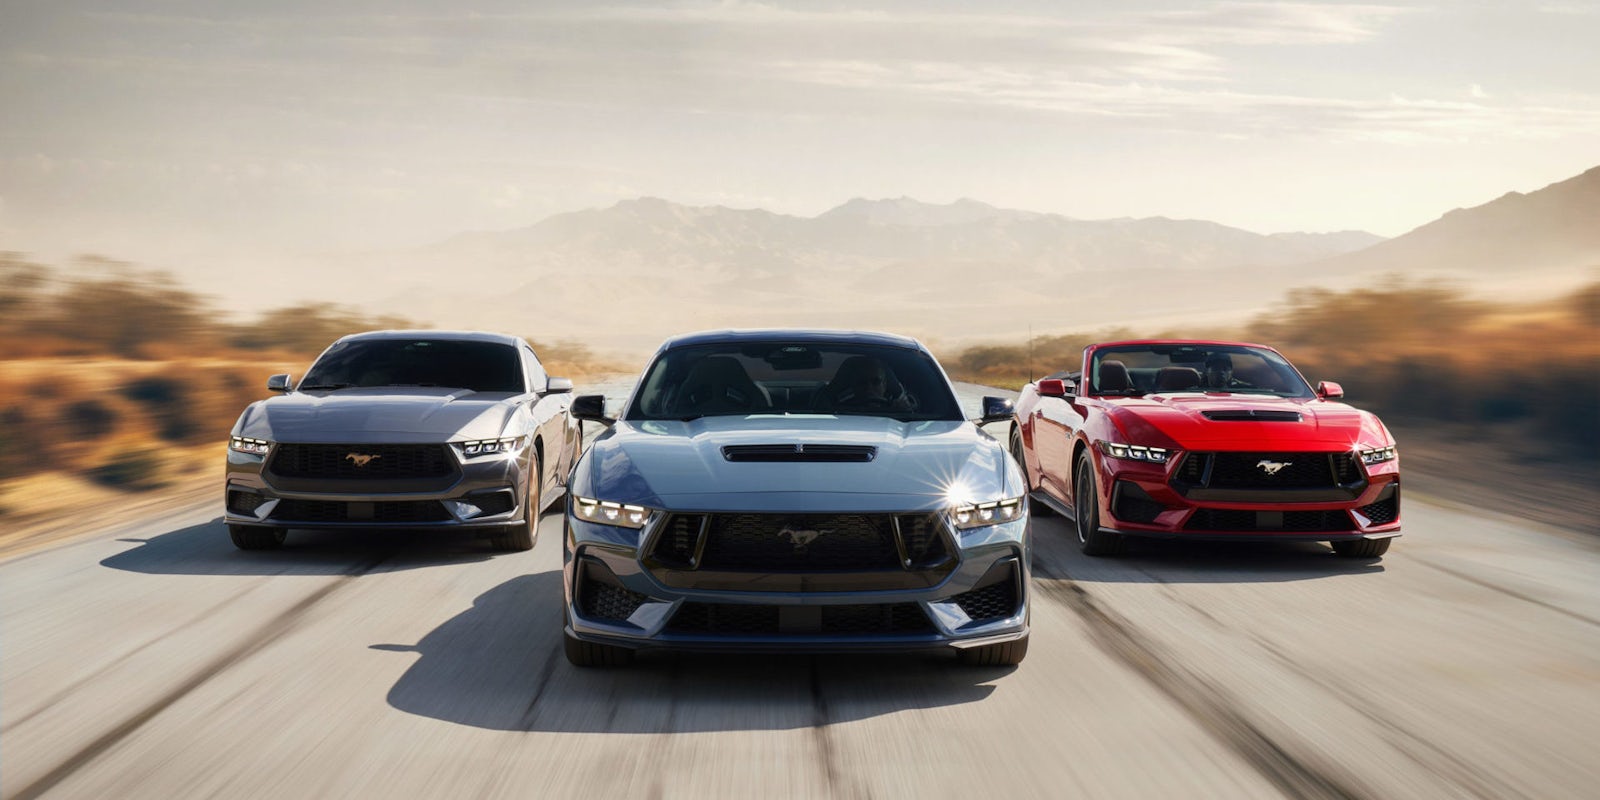 New Ford Mustang and Dark Horse power figures revealed: here's